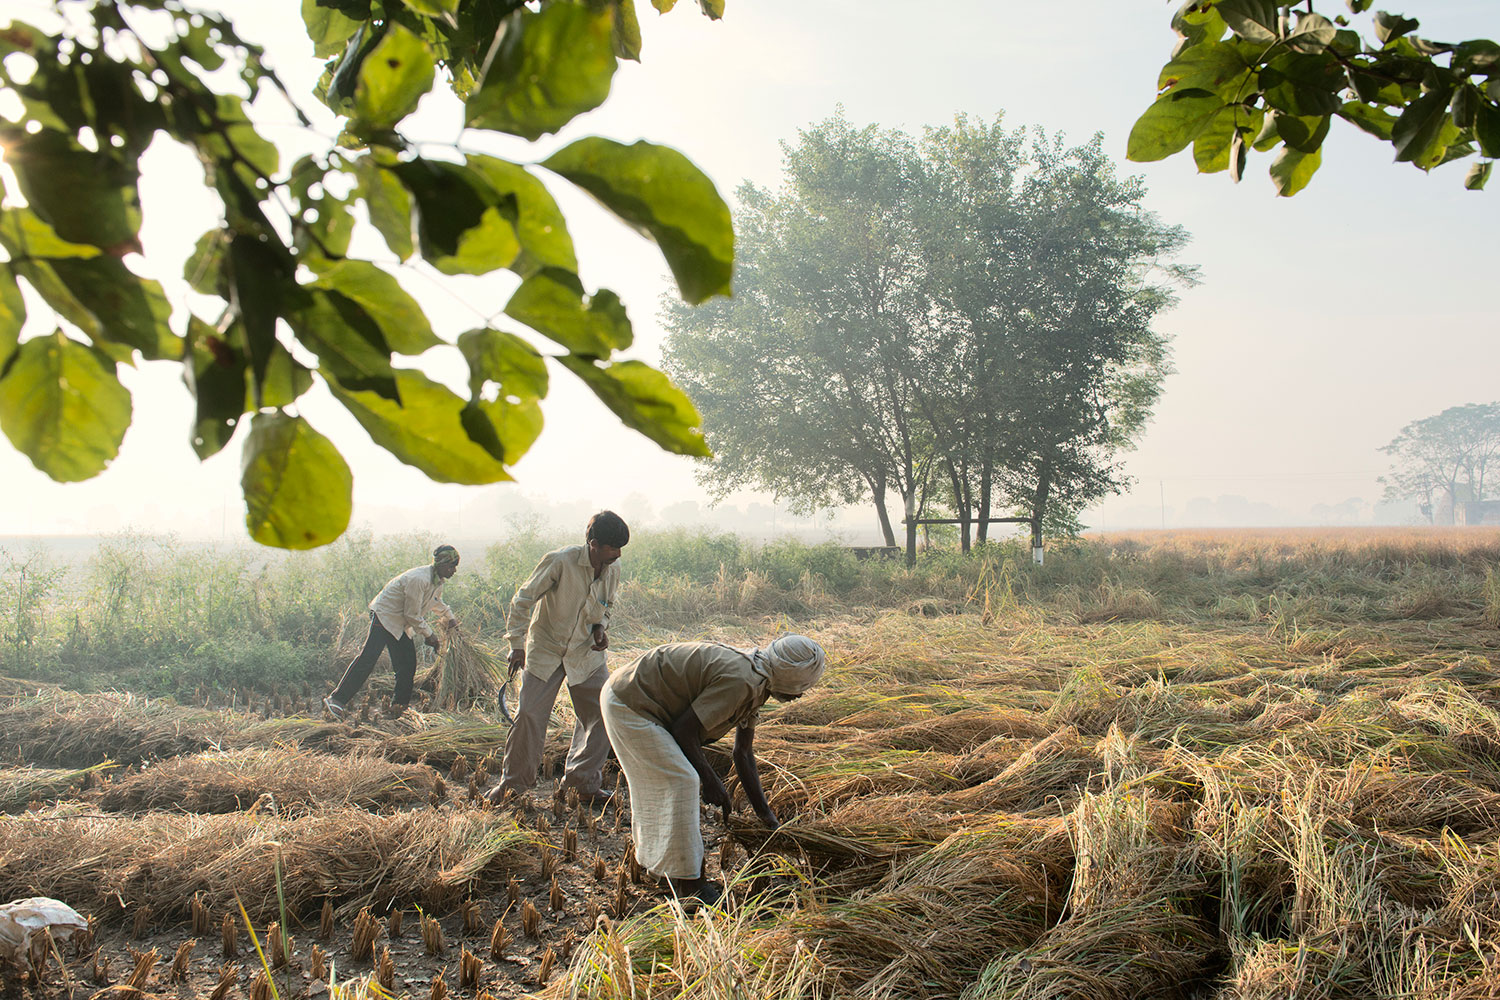 Farm laborers in Patiala harvest rice by hand